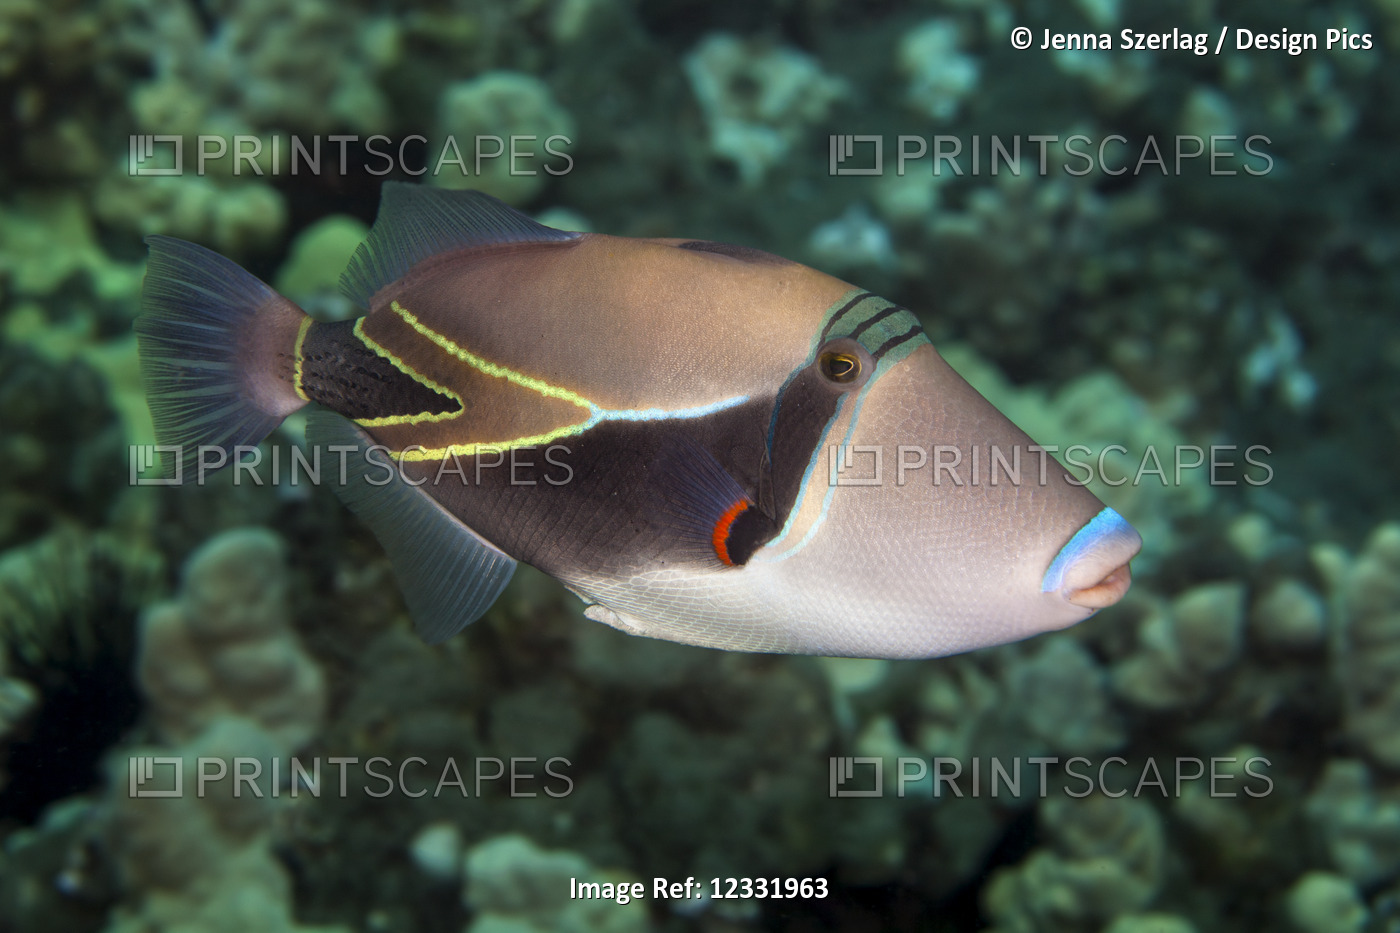 A close-up underwater view of a Reef Triggerfish (Rhinecanthus rectangulus); ...